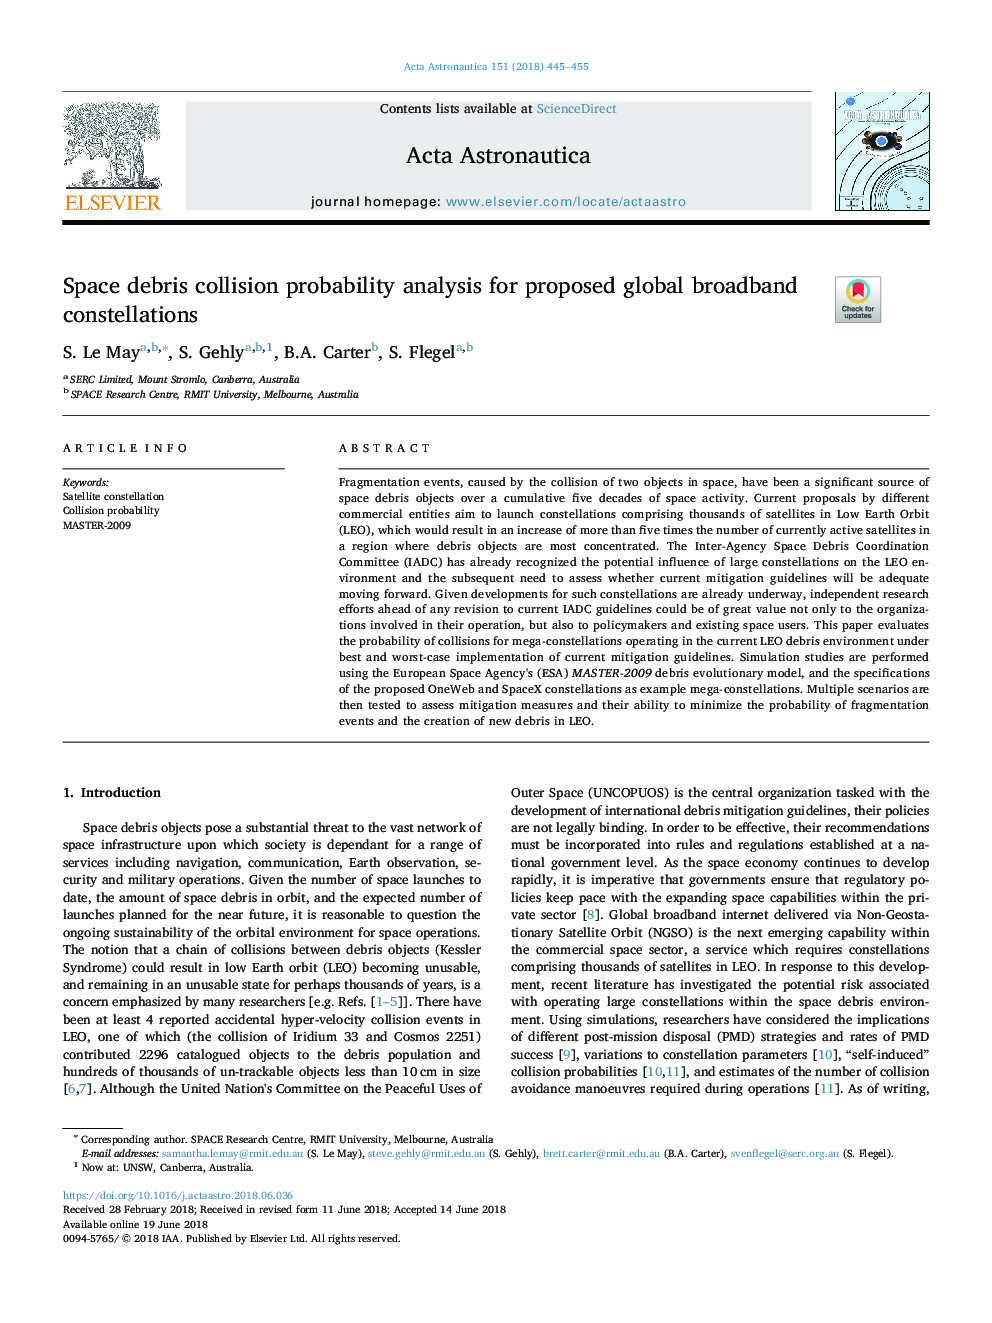 Space debris collision probability analysis for proposed global broadband constellations